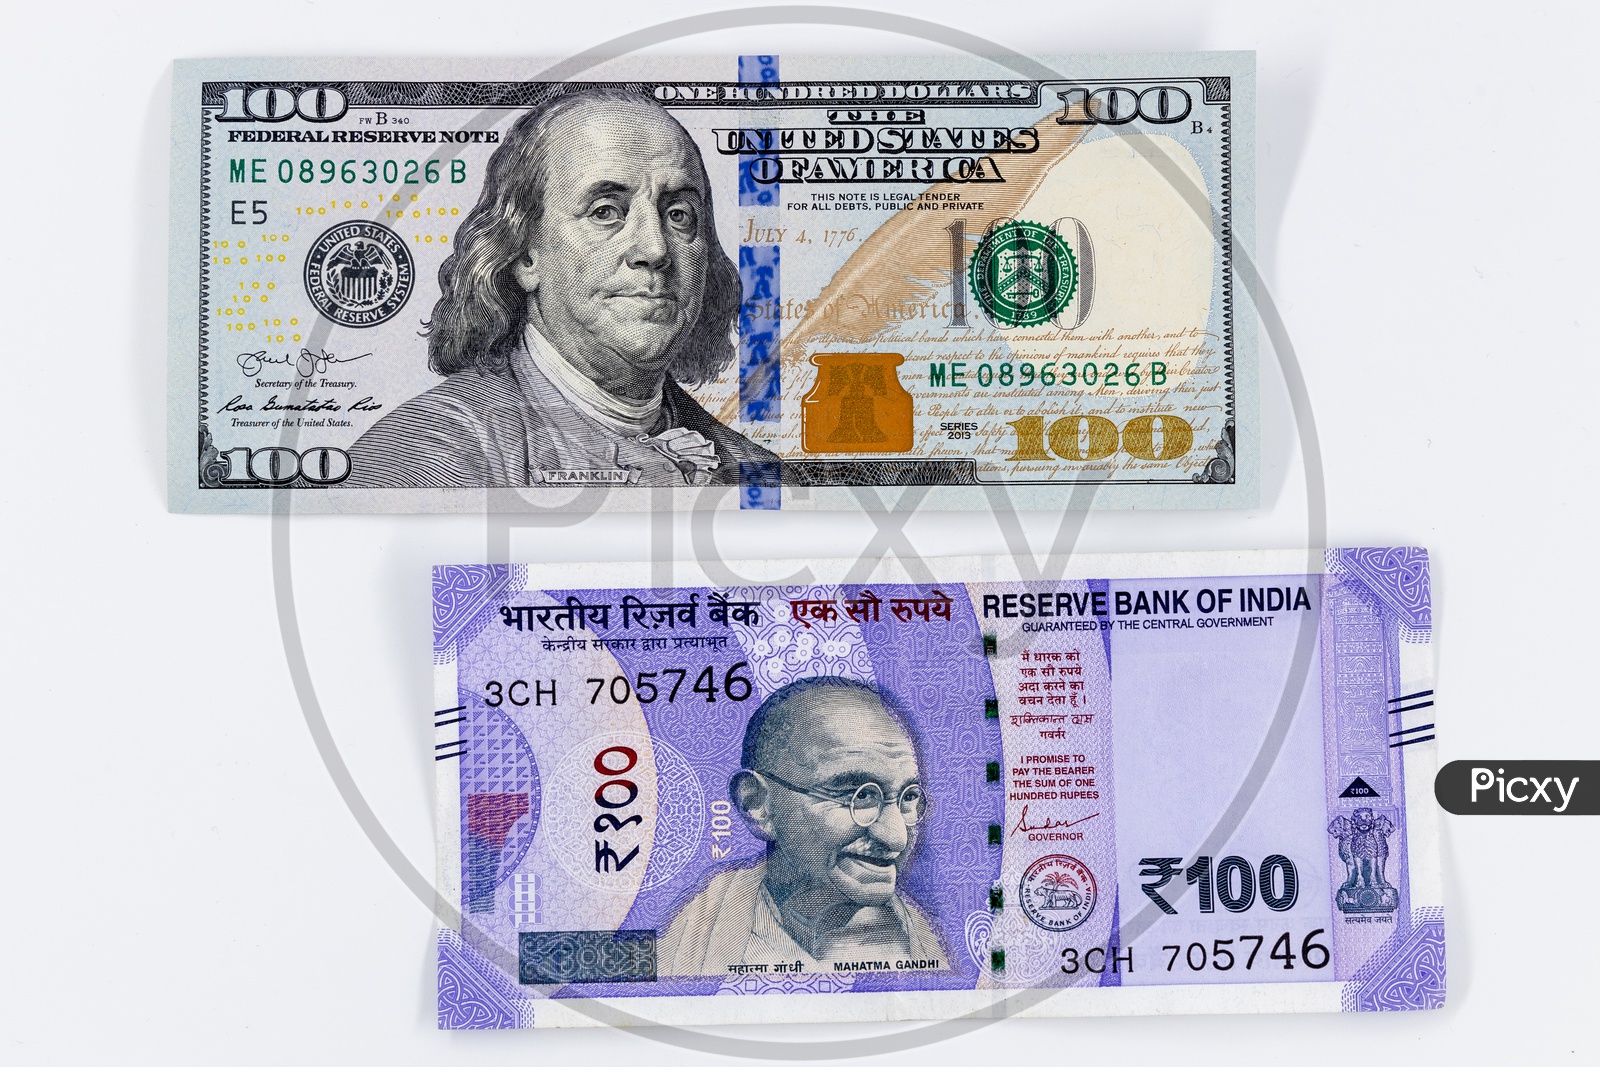 Image Of Indian 100 Rupee Currency Note With Us 100 Dollar Bill On An Isolated White Background Mm717782 Picxy